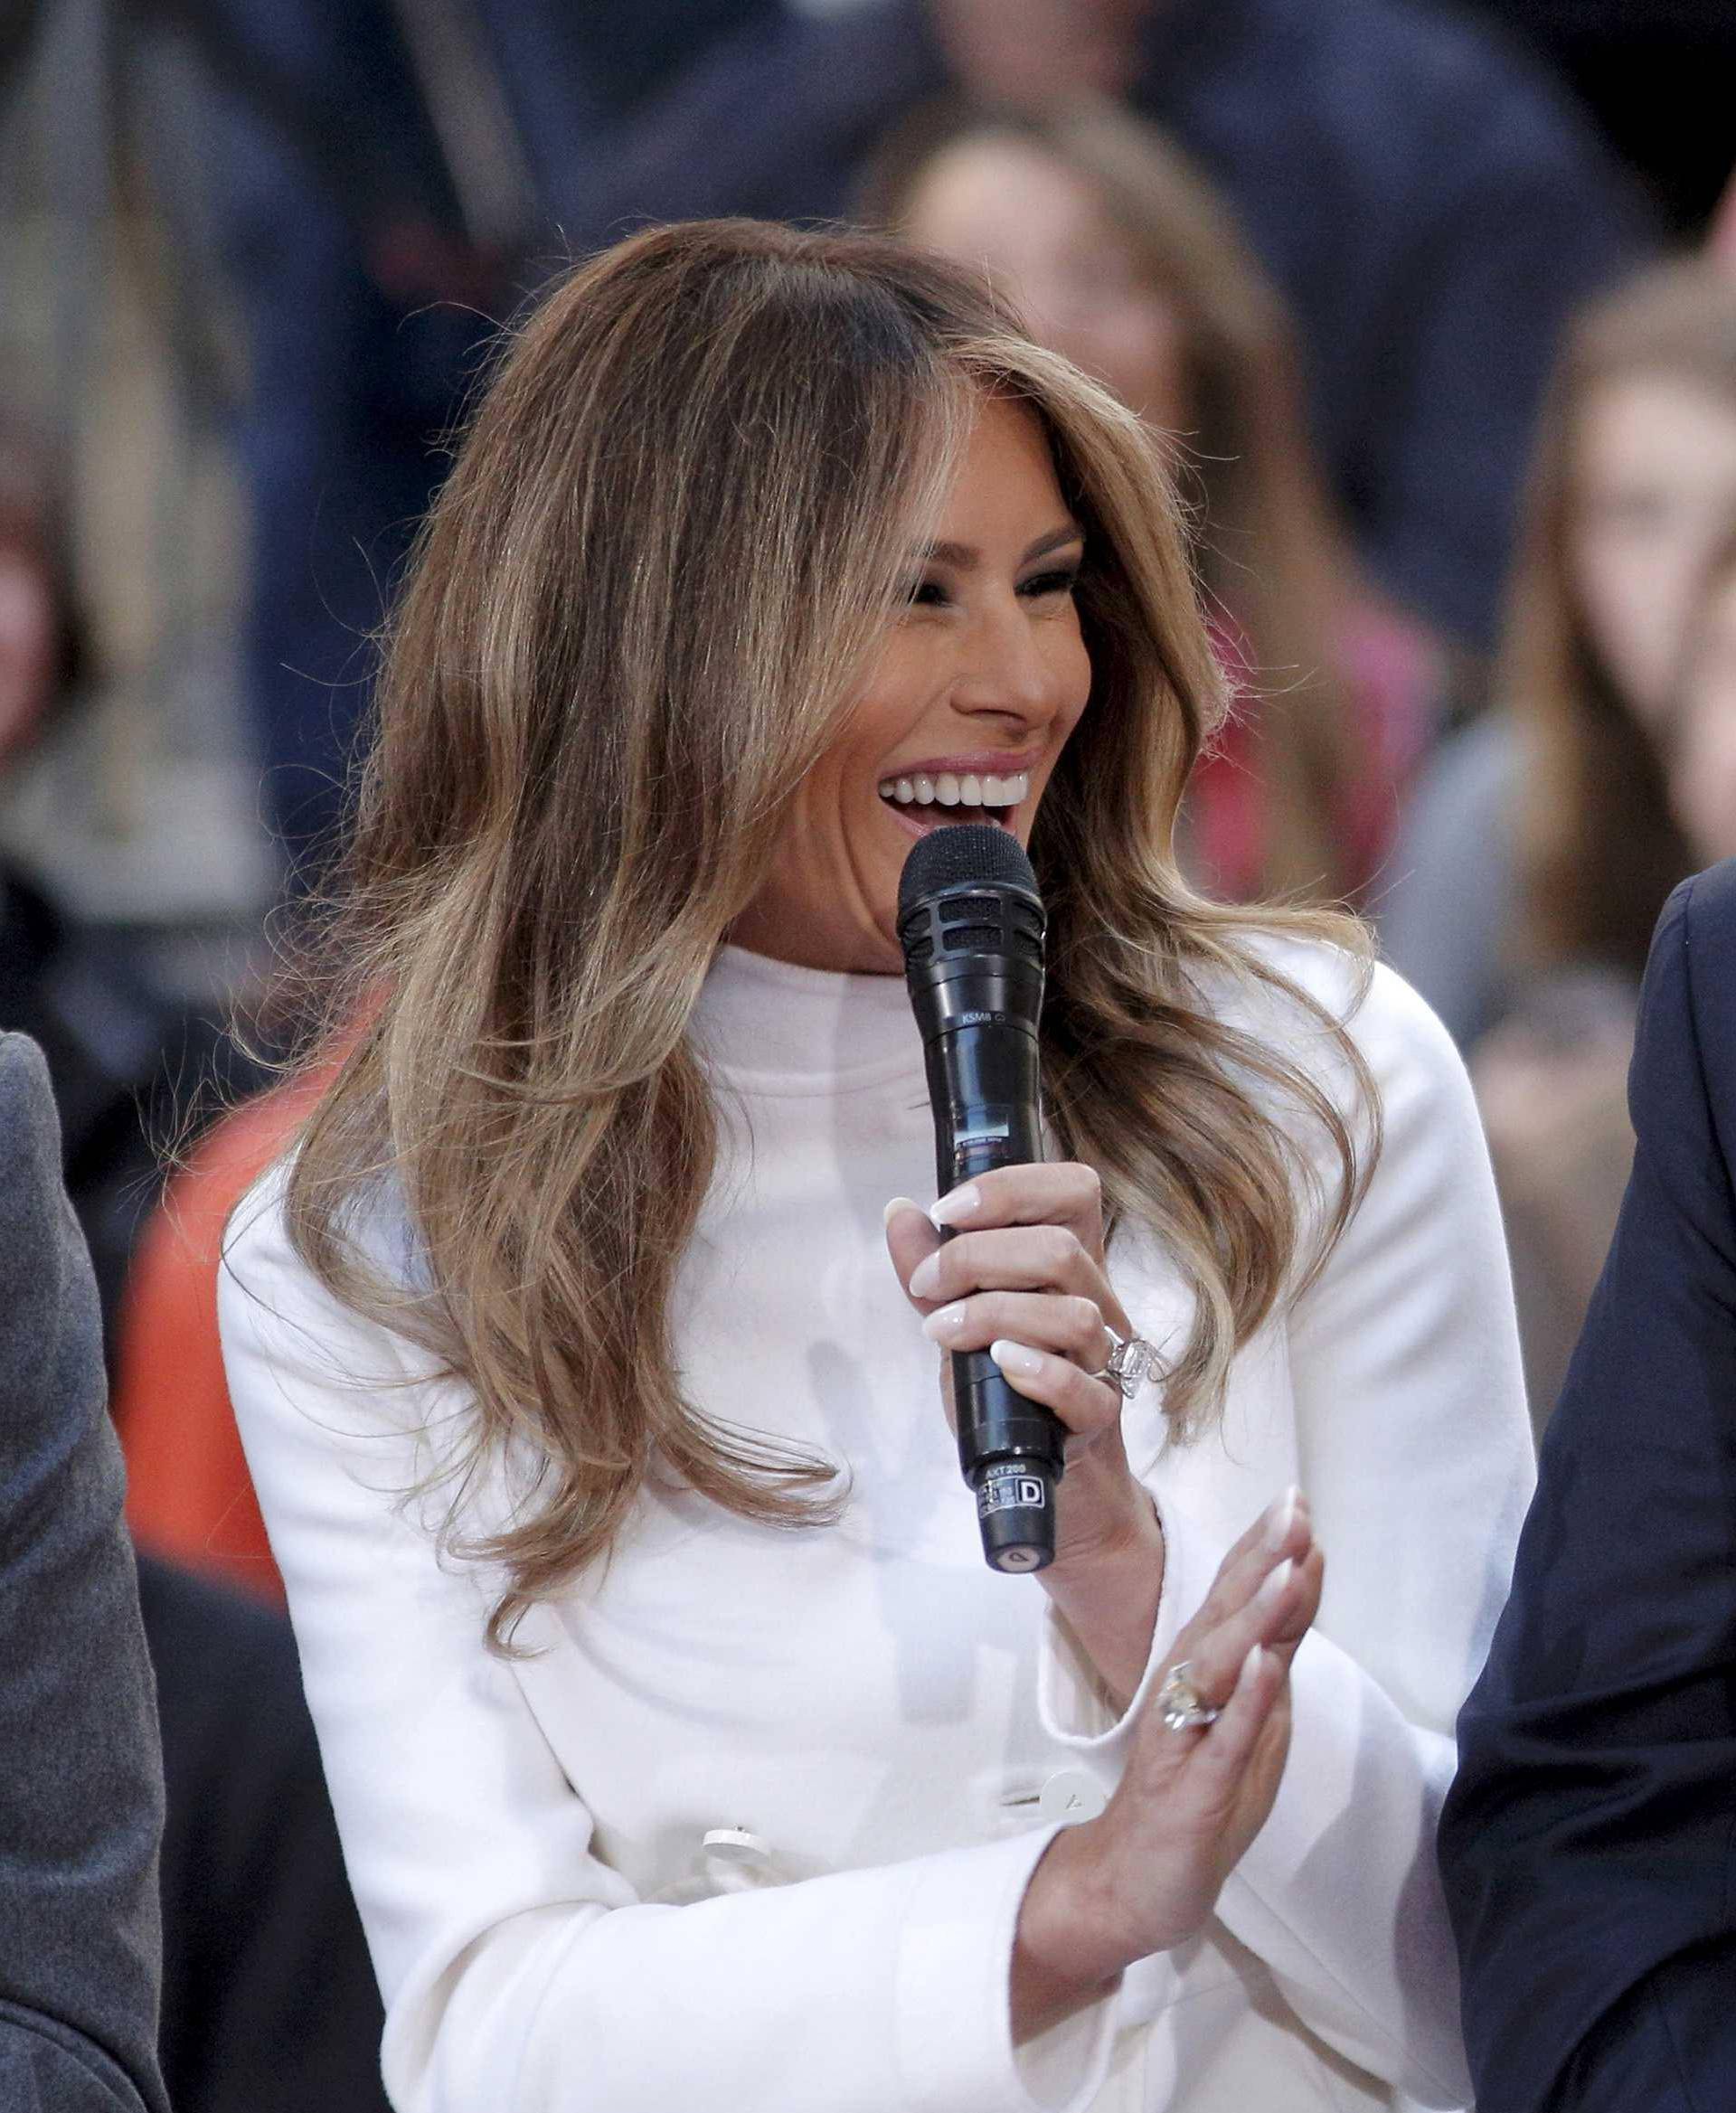 U.S. Republican presidential candidate Donald Trump reacts to an answer his wife Melania gives during an interview on NBC's "Today" show in New York